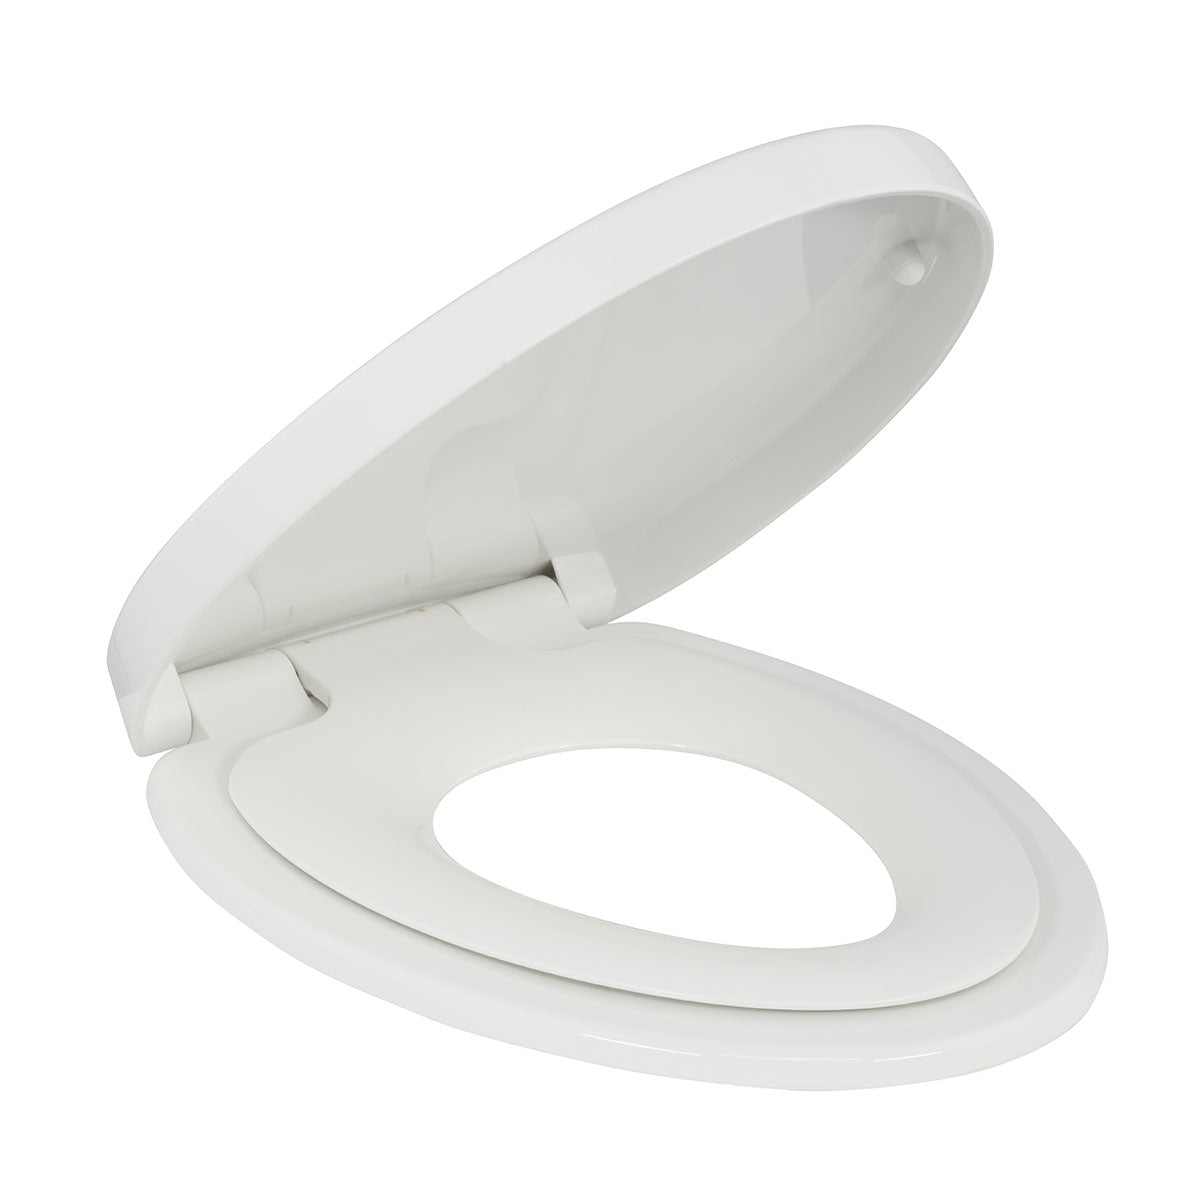 Family Toilet Seat With Built-In Seat Bath Royale